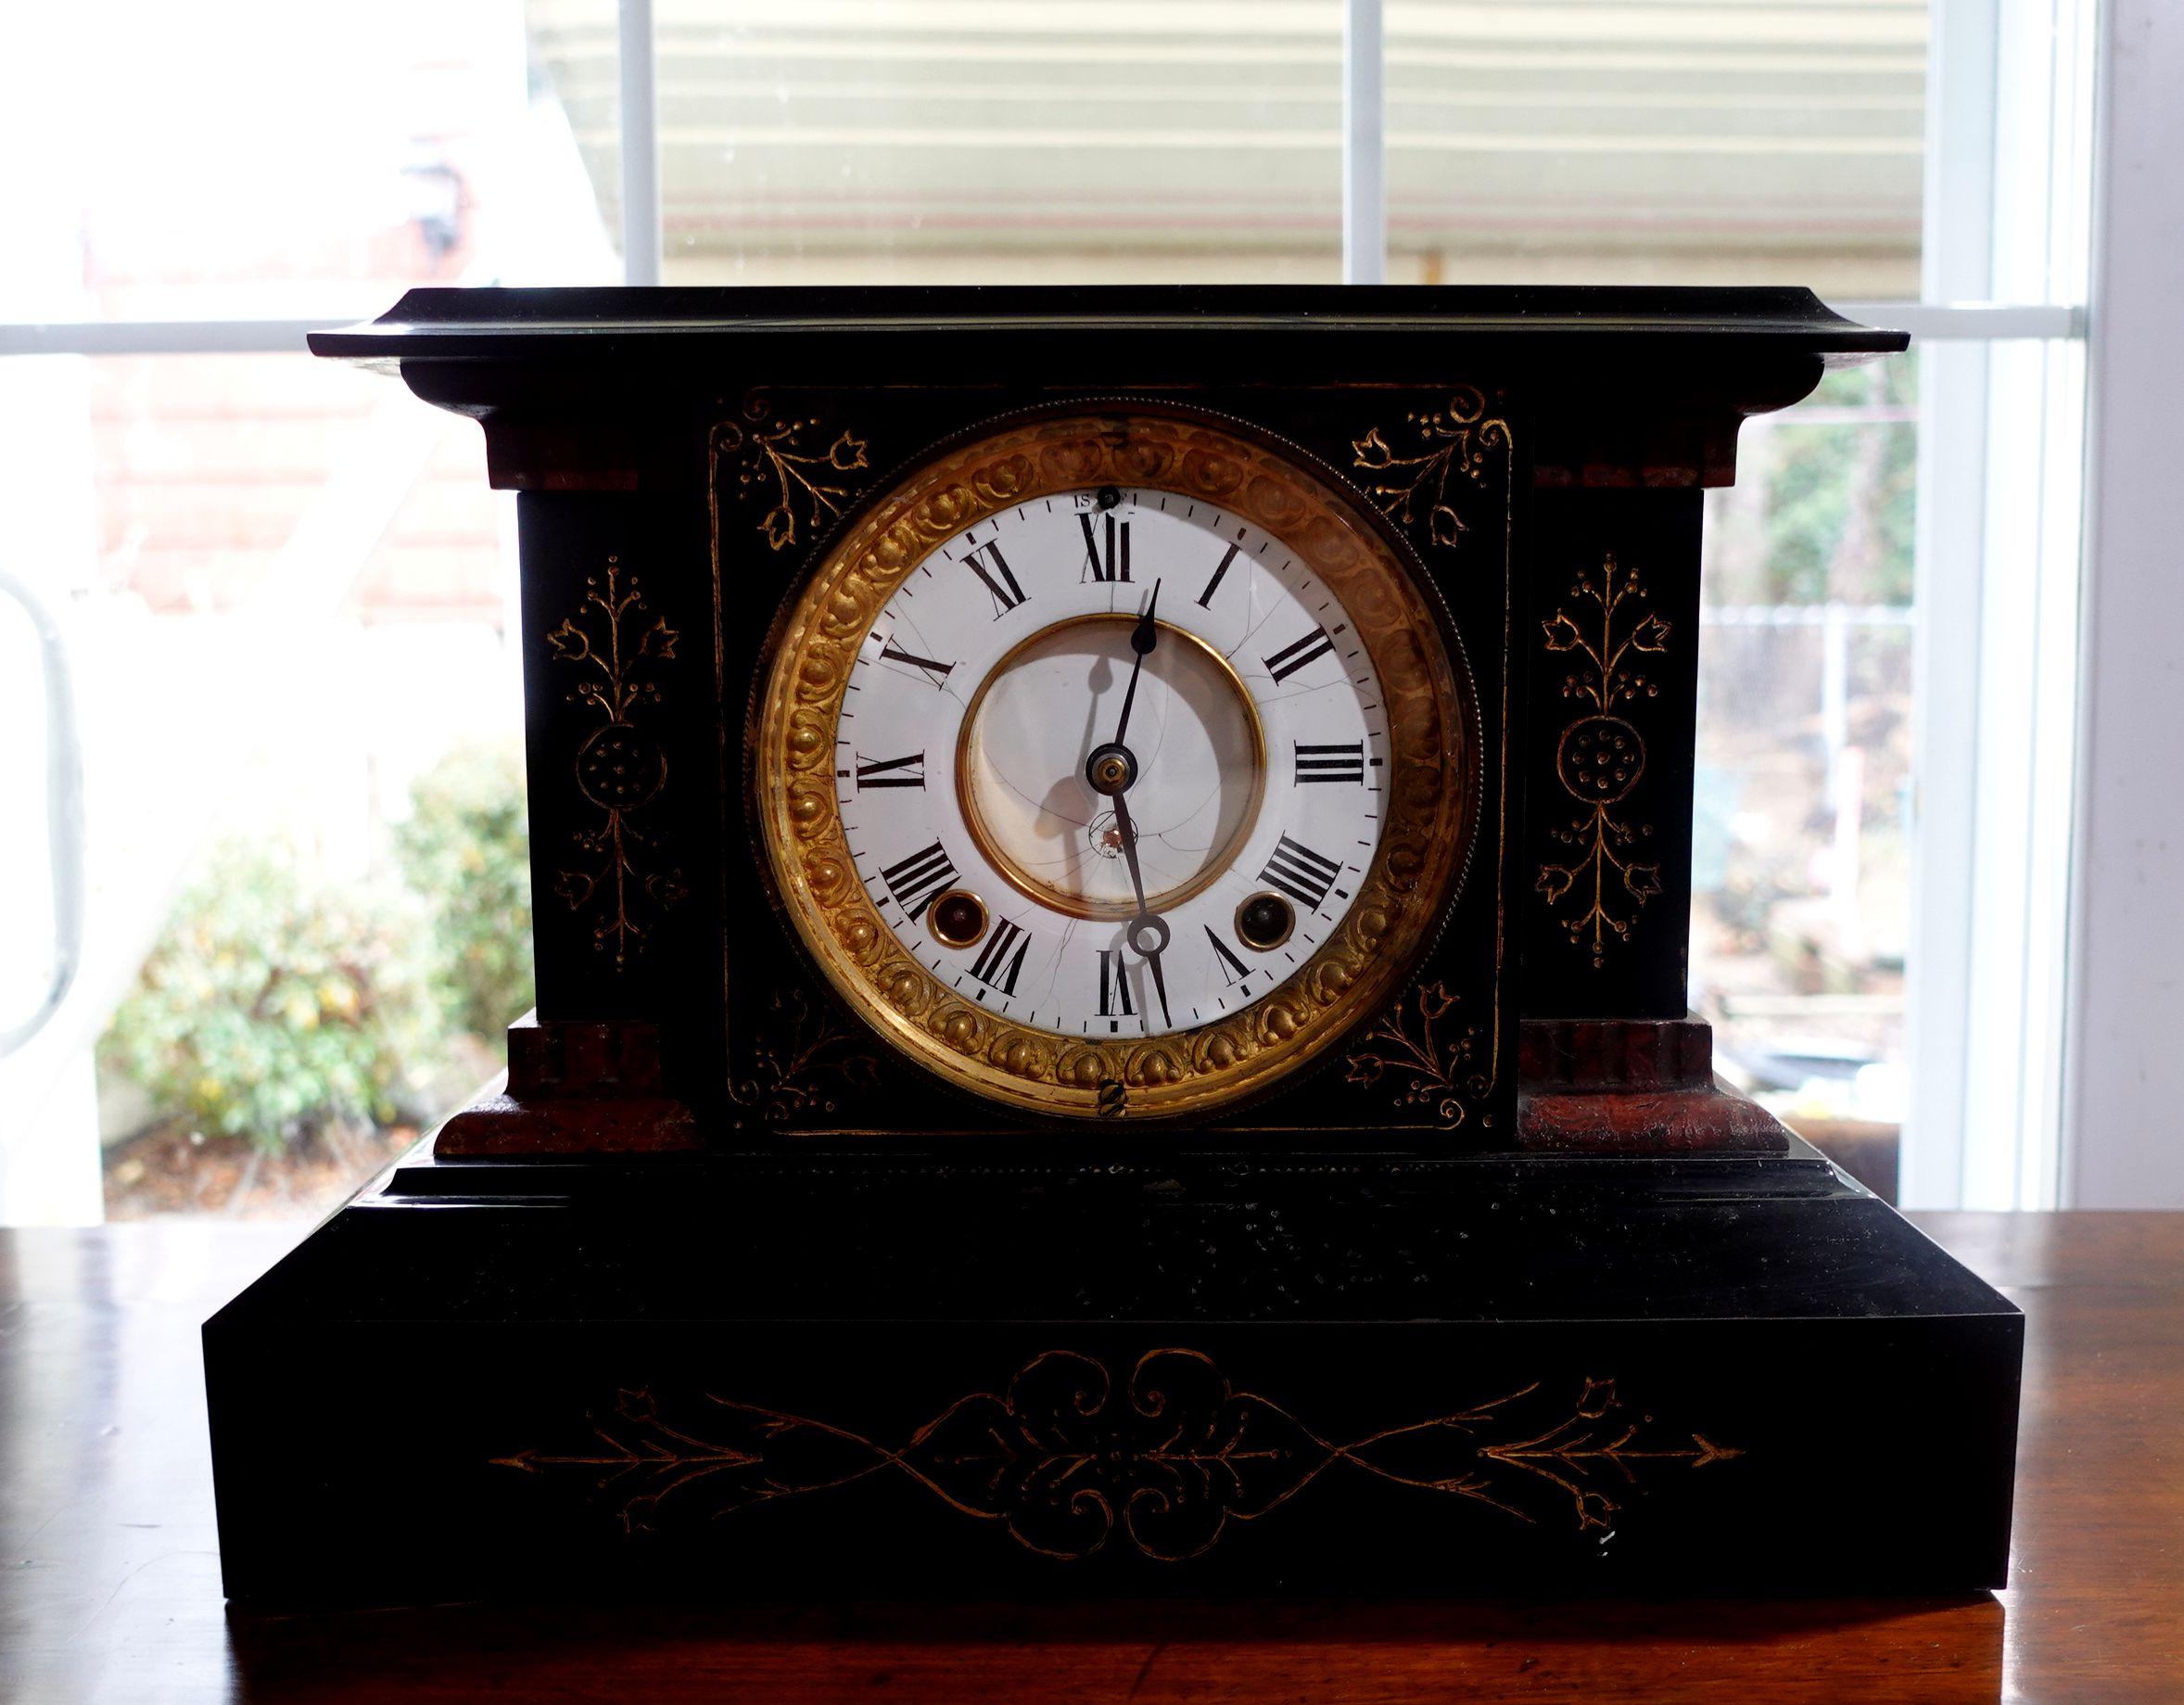 Beautiful Seth Thomas Adamantine clock with wood and marble built-in high quality. and very heavy. The finish is in untouched condition and still looks super after all of these years.
This clock has been well cared for and maintained for over 100